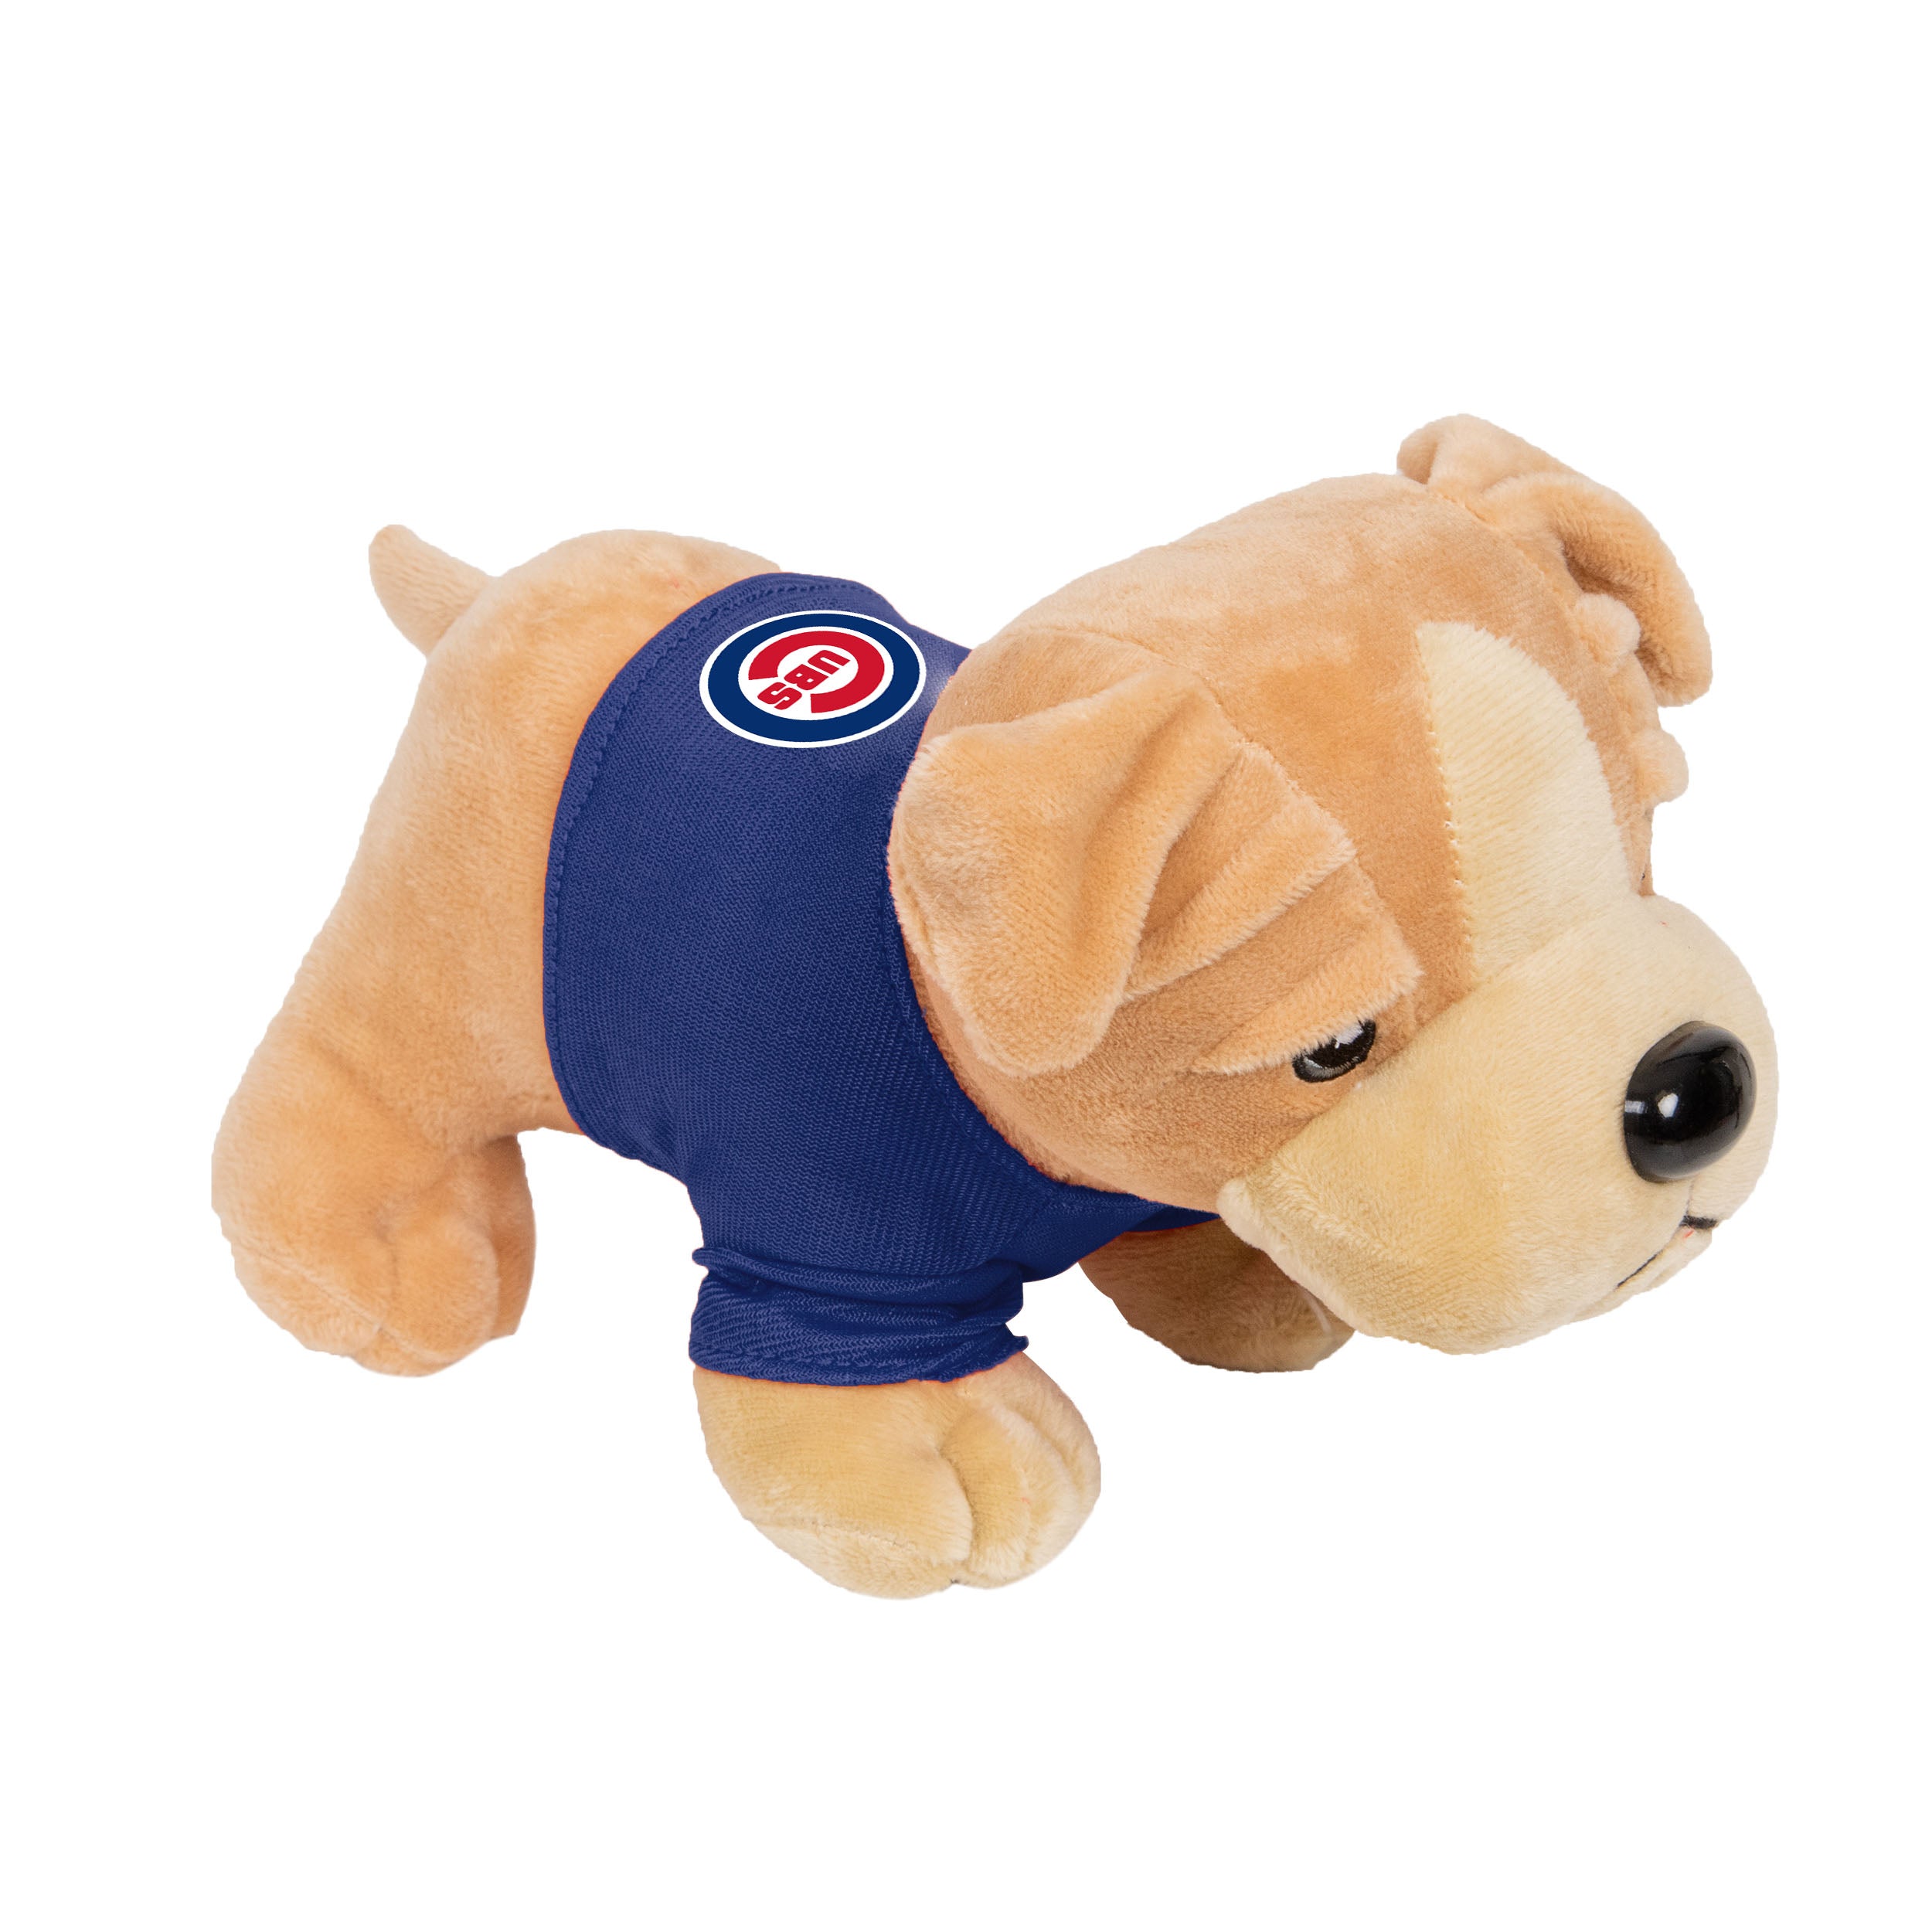 Chicago Cubs Collectables: Figurines, Gifts & Memorabilia - Clark Street  Sports